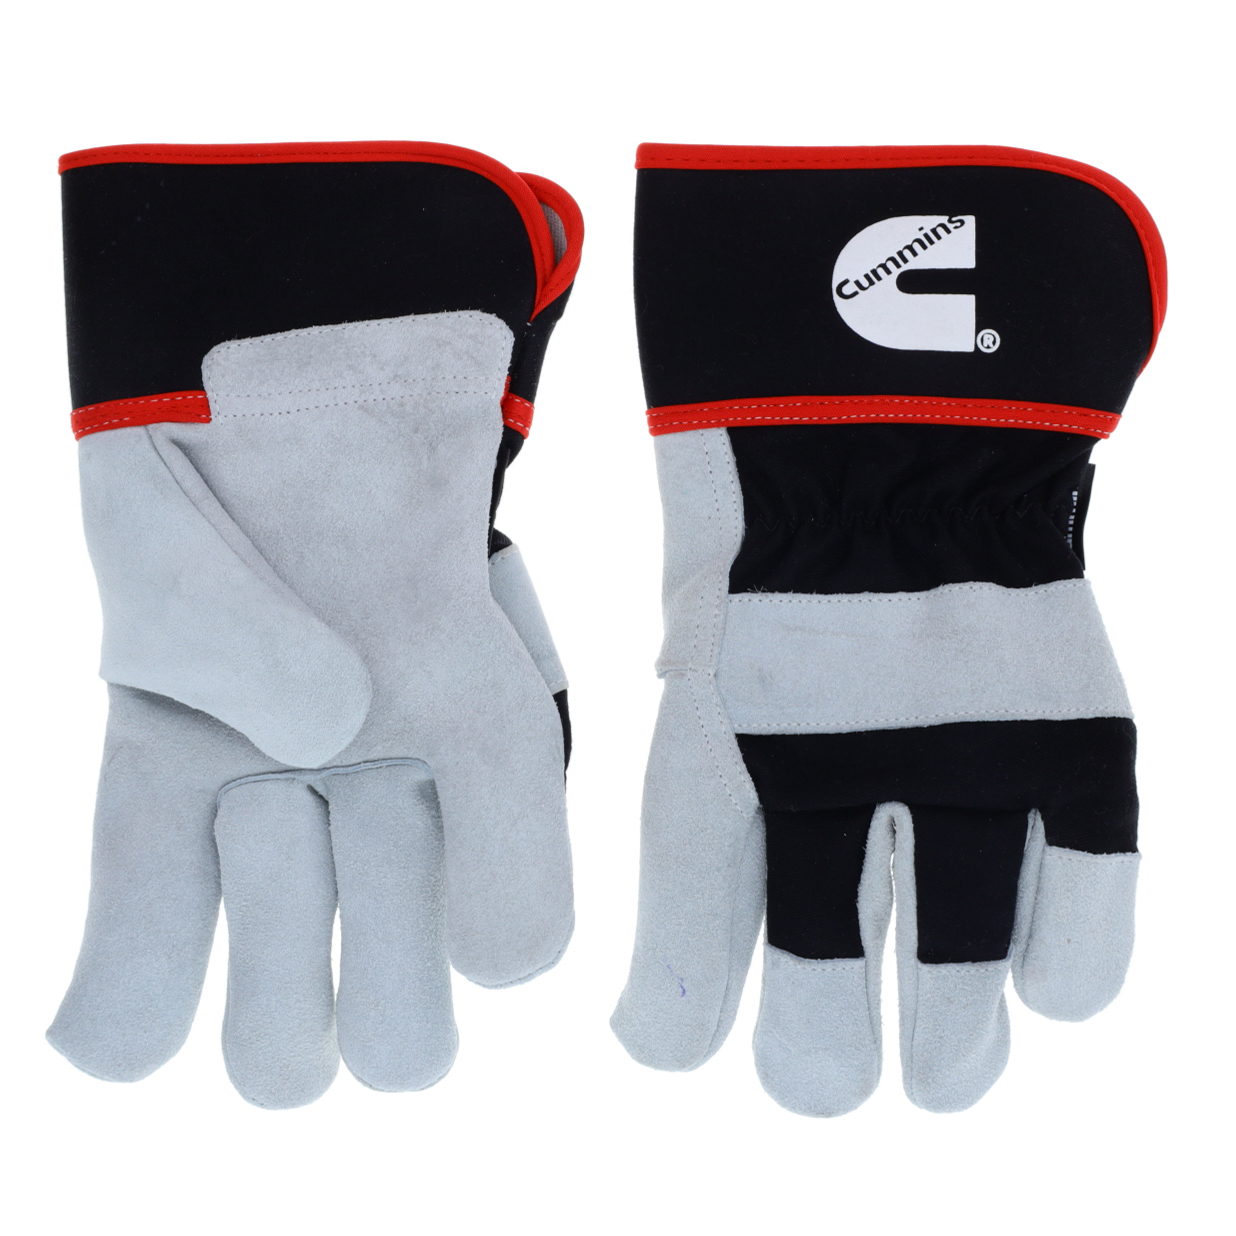 Cummins Split Leather Palm Gloves CMN35114 - Mens Leather Work Gloves Heavy Duty Warehouse Gloves for Men with Safety Cuff and L